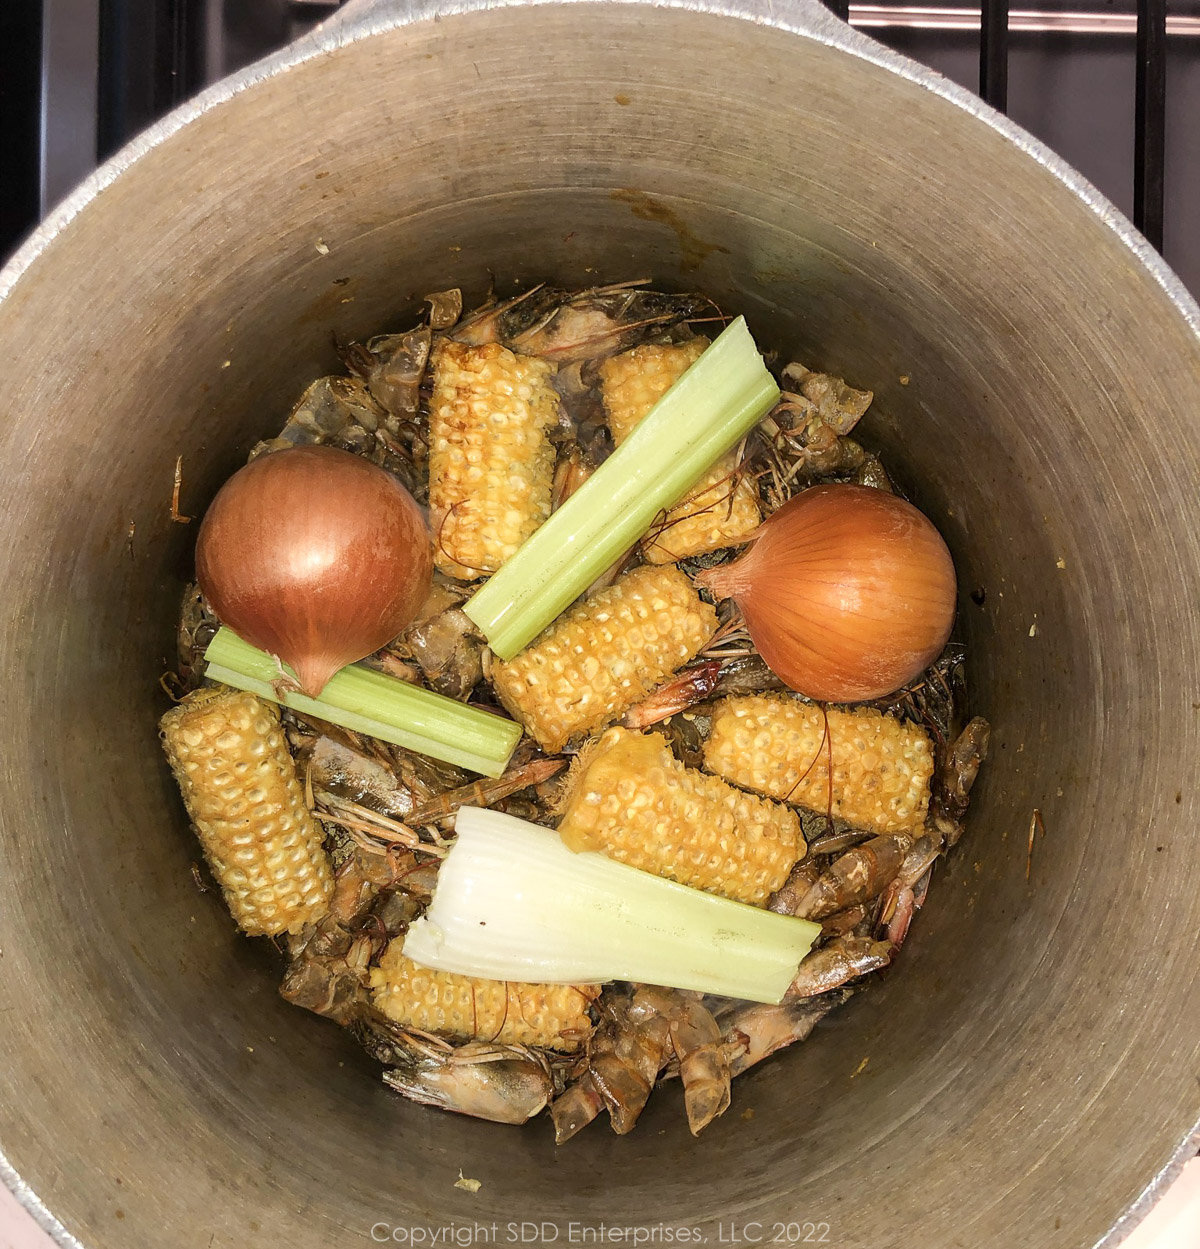 onins and celery added to corn cobs and shrimp shells in stockpot